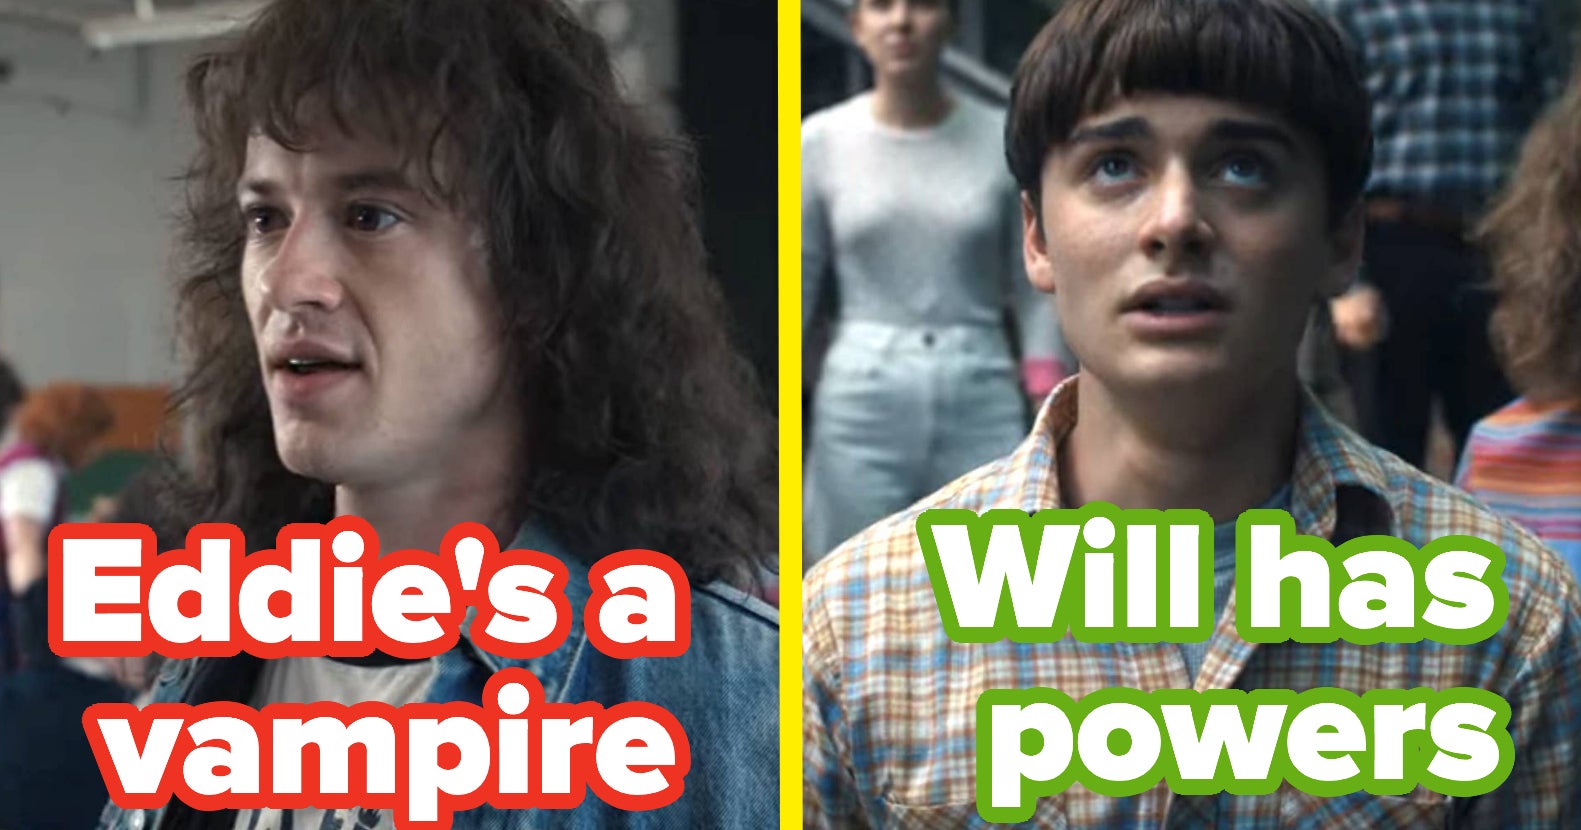 People are shook over theory about Will and his future in Stranger Things